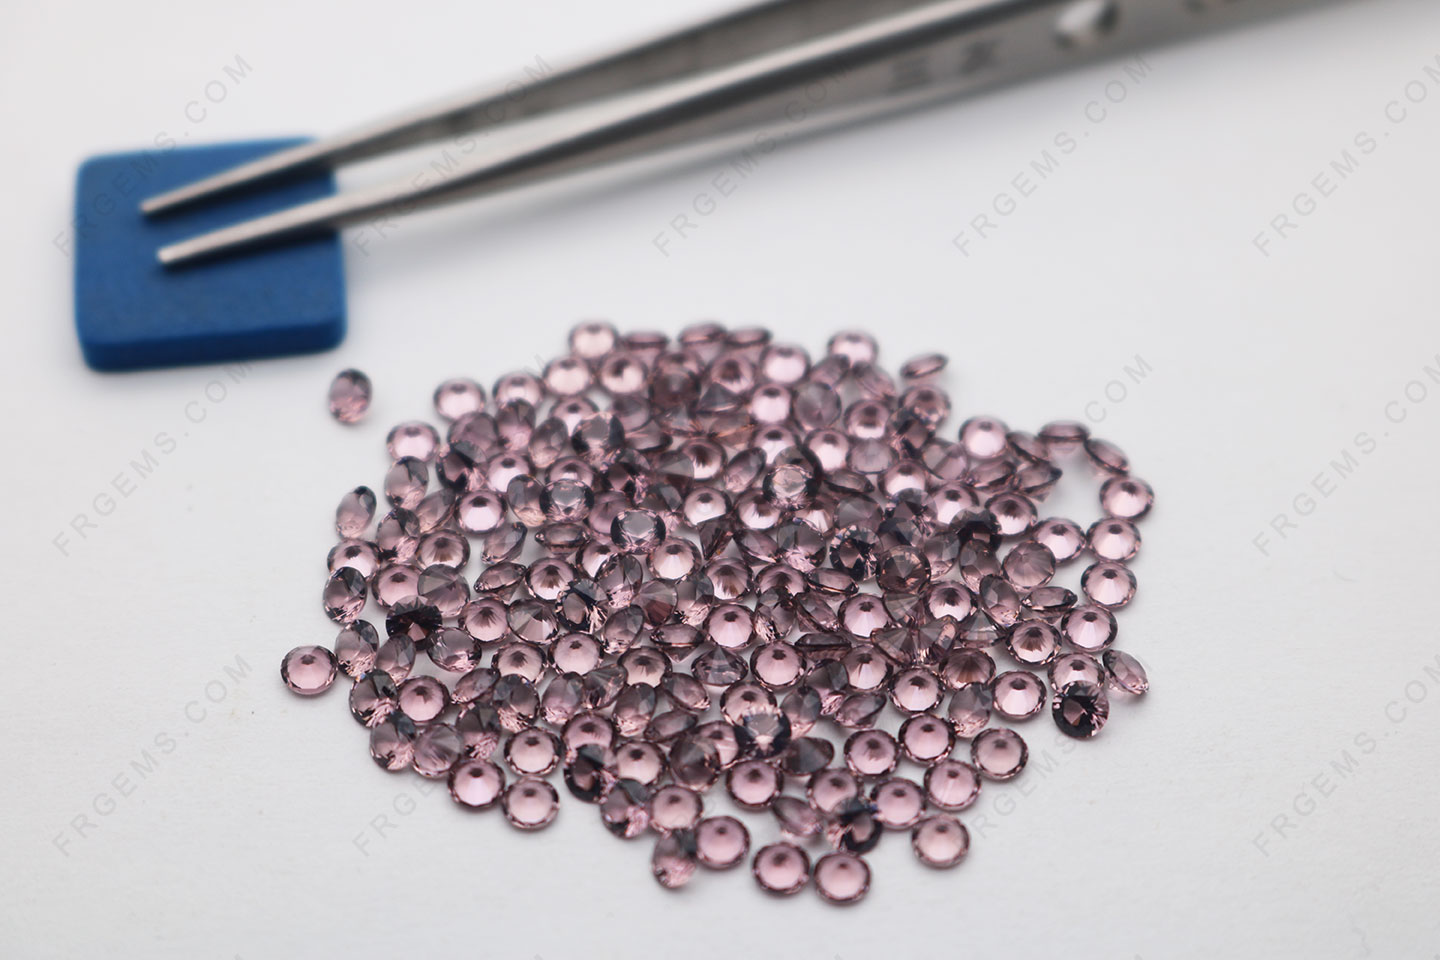 Loose Nano Crystal Morganite 181# color Round Faceted cut 3mm gemstones manufacturer in China